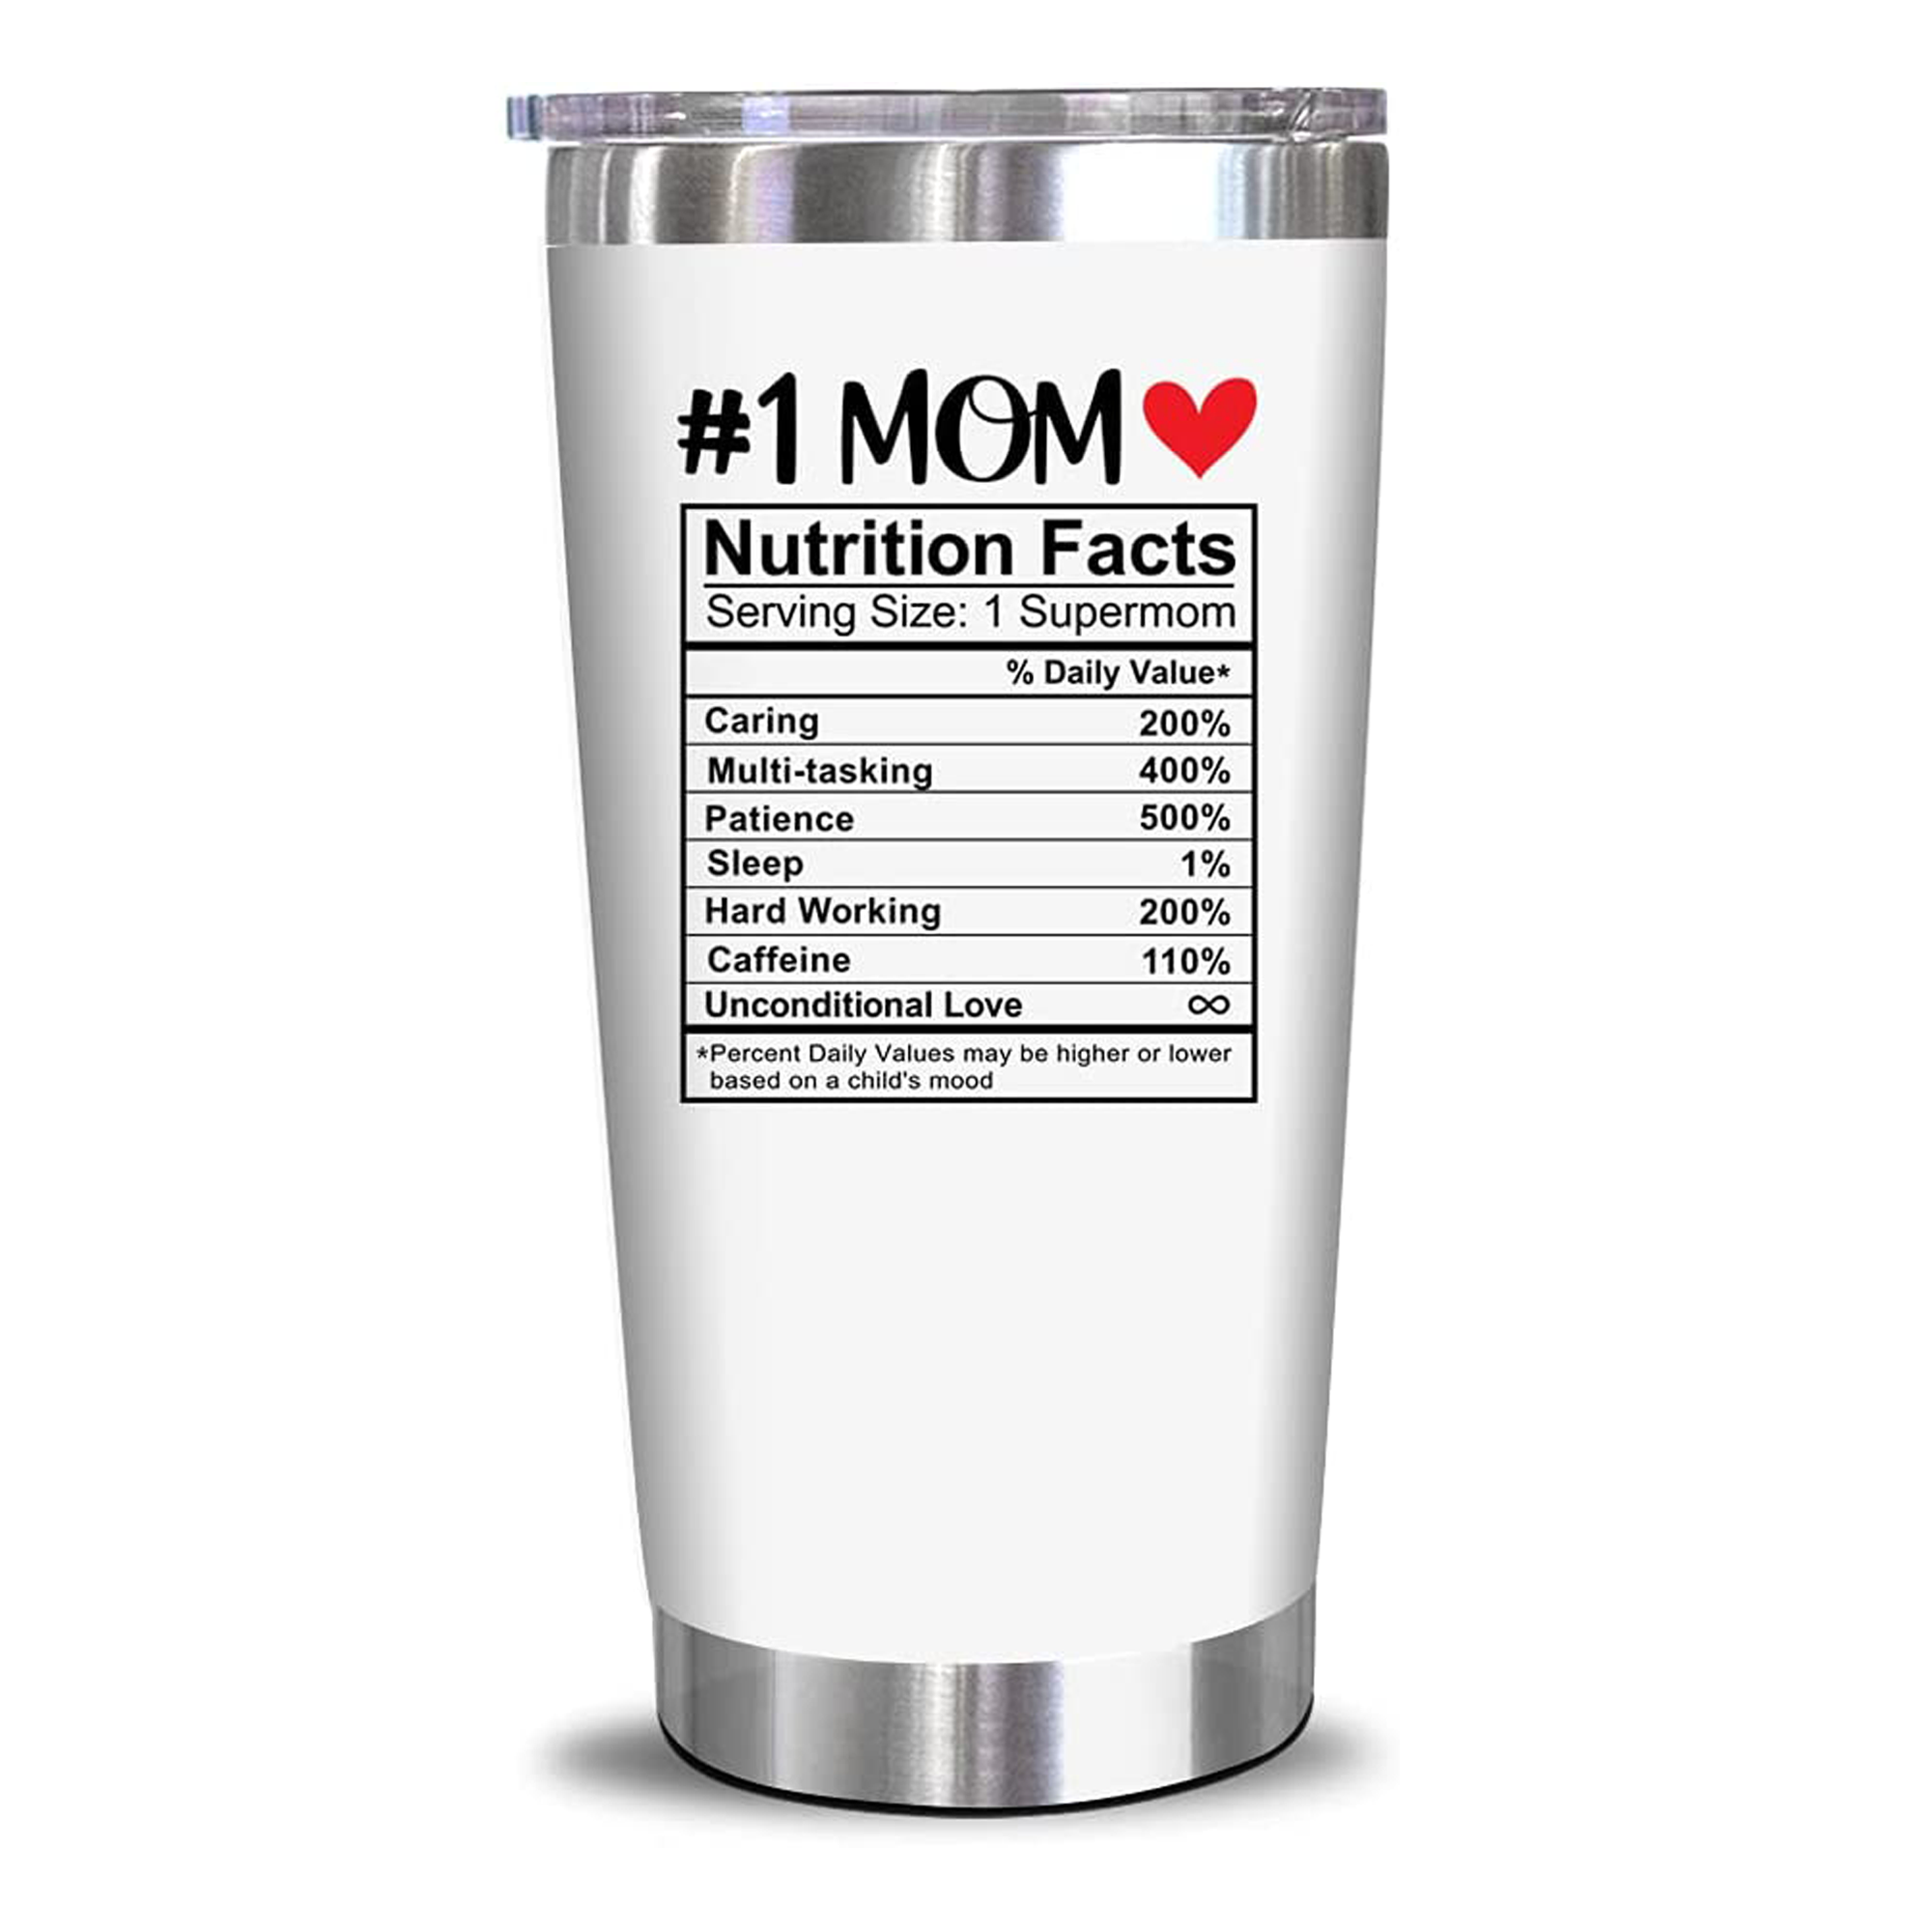 Mom Gifts from Son - 20oz Stainless Steel Insulated Blue Rose Mom Tumbler  Present - Christmas, Valentine''s Day, Mom Birthday Gifts, Mothers Day  Gifts from Daughter for Mom, New Mom, Bonus Mom 